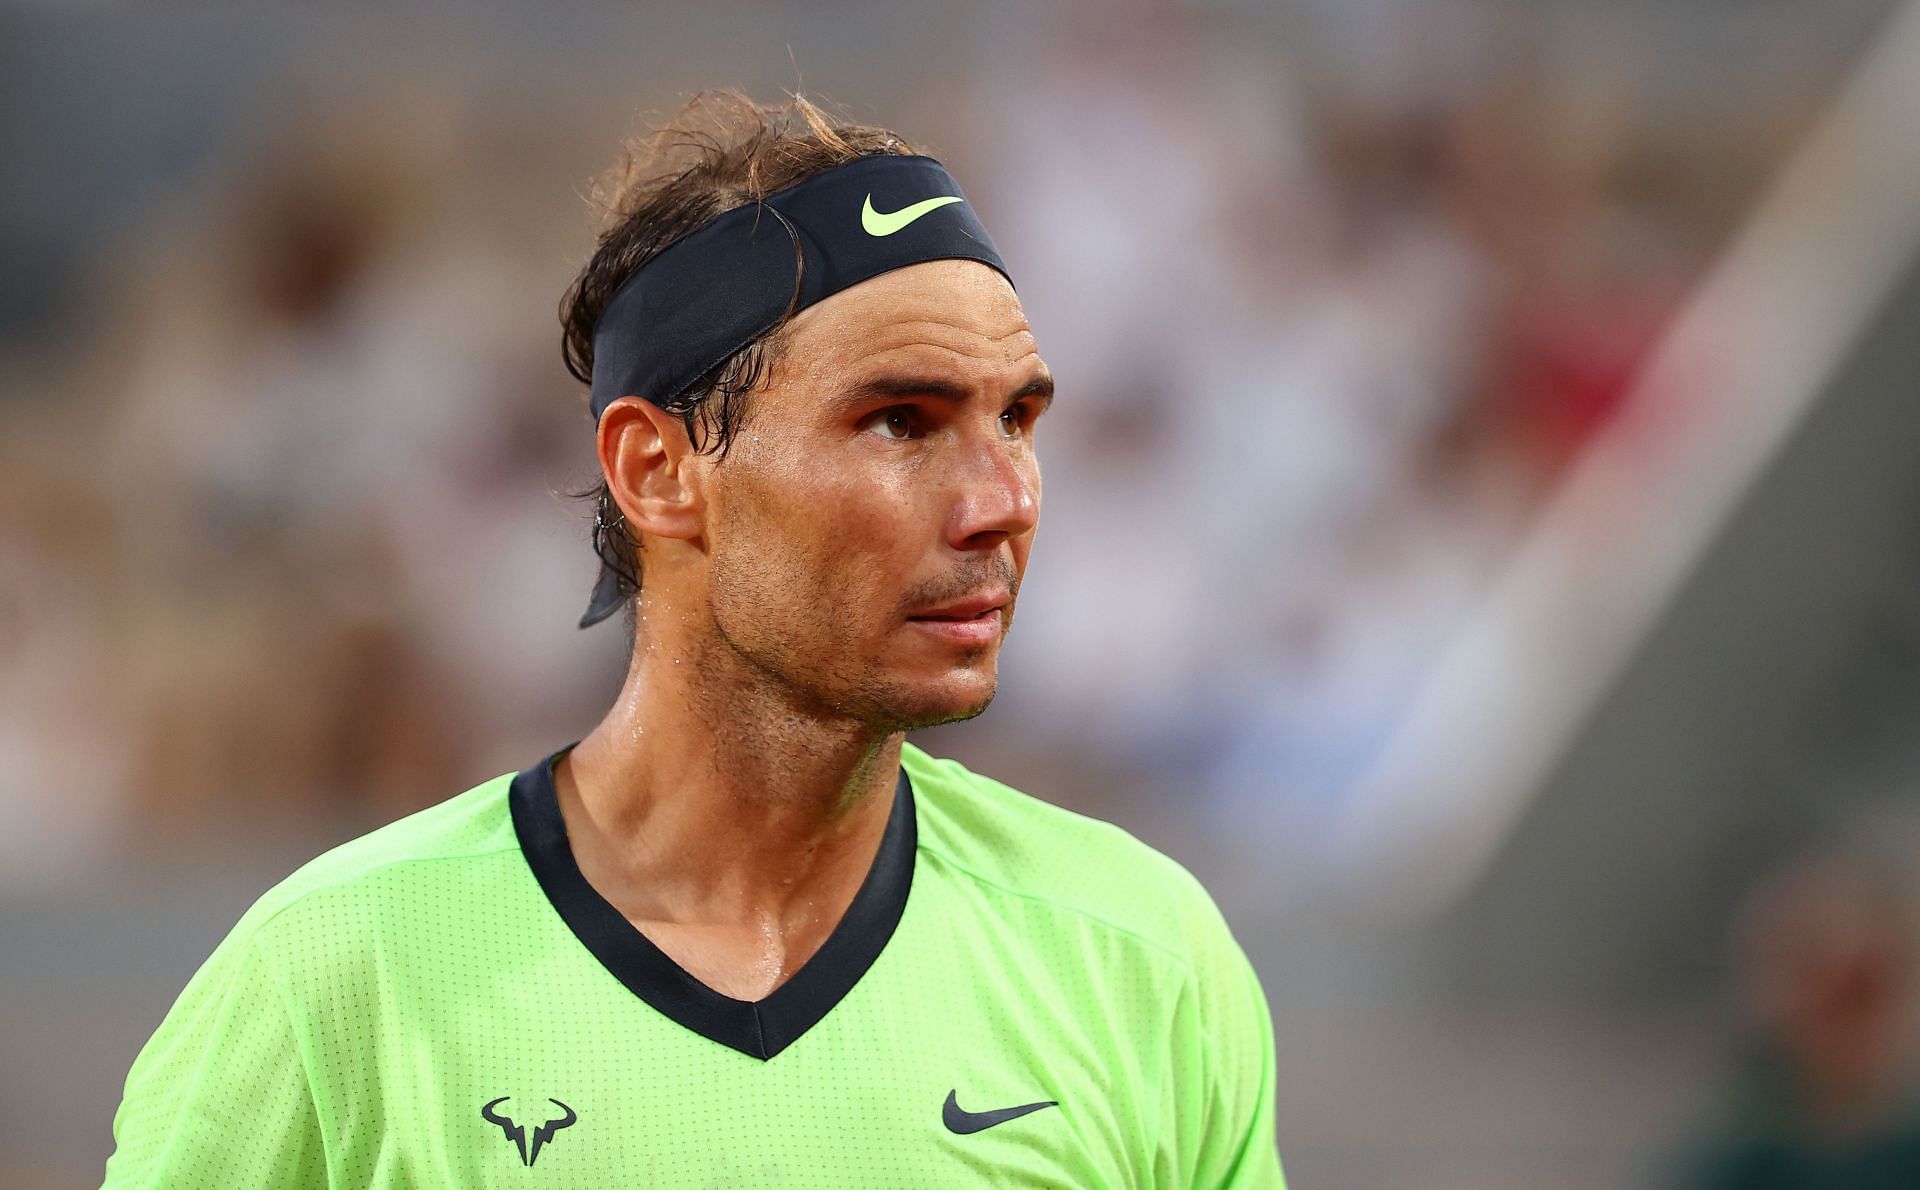 Rafael Nadal can equal Novak Djokovic if he manages to become the World No. 1 in 2022